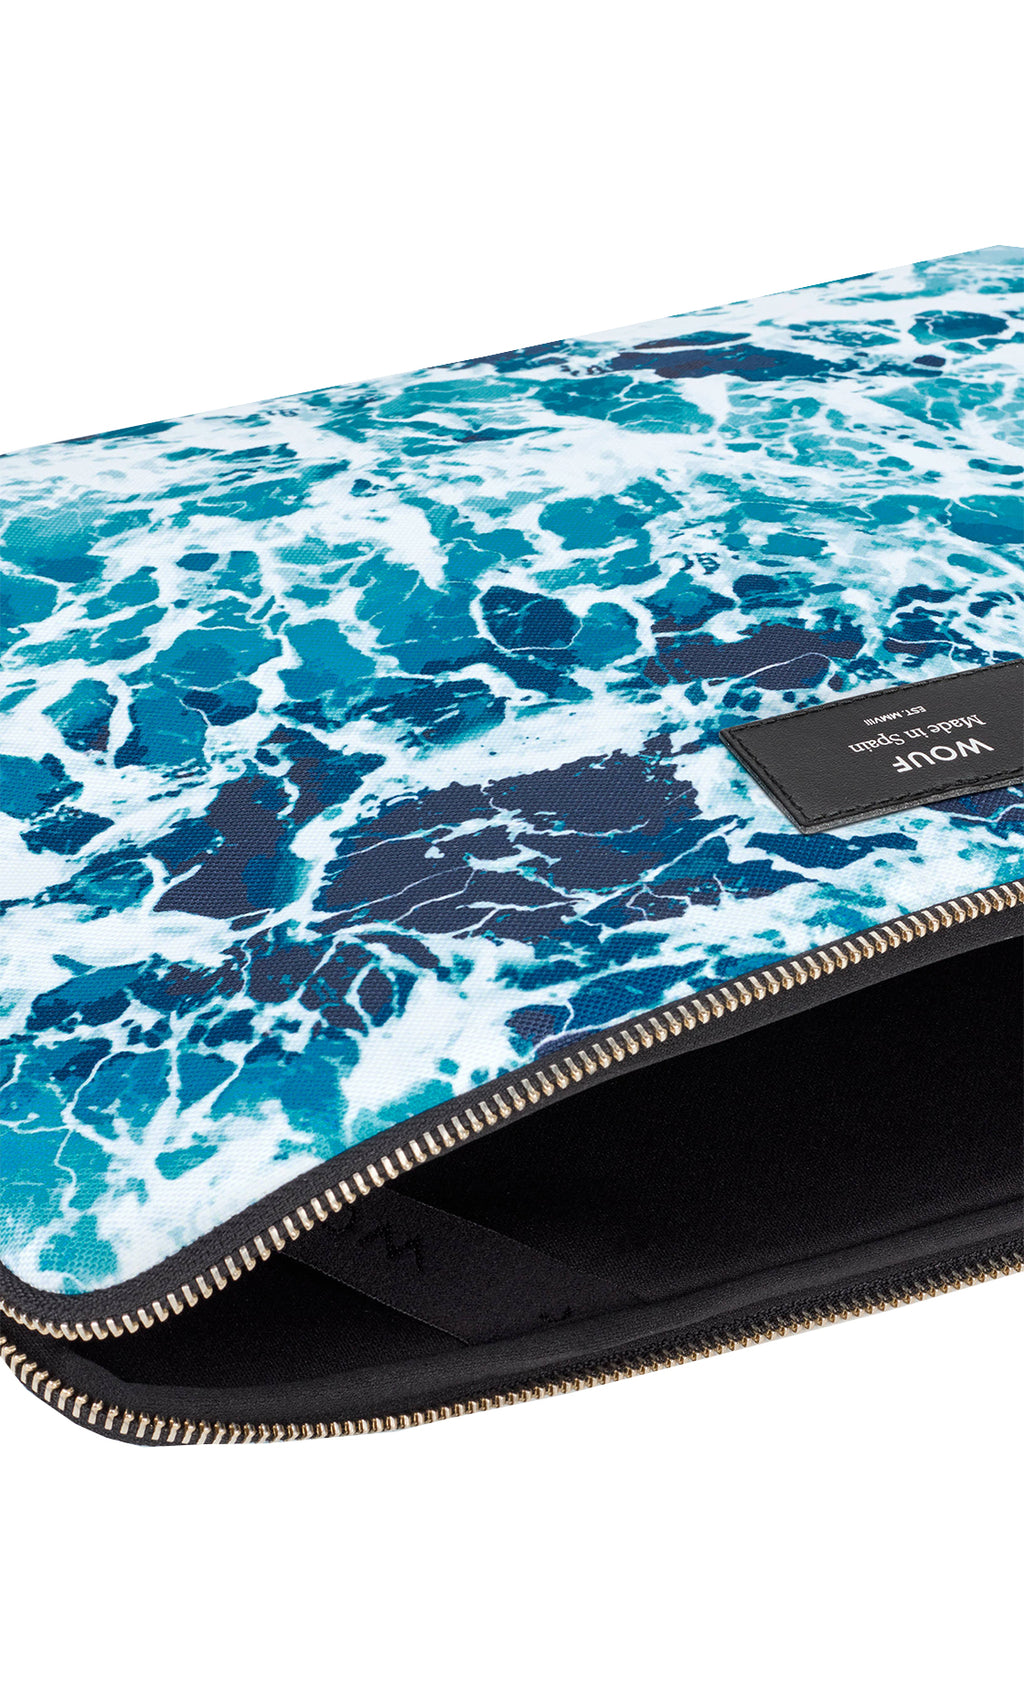 WOUF WAVES LAPTOP SLEEVE 15"